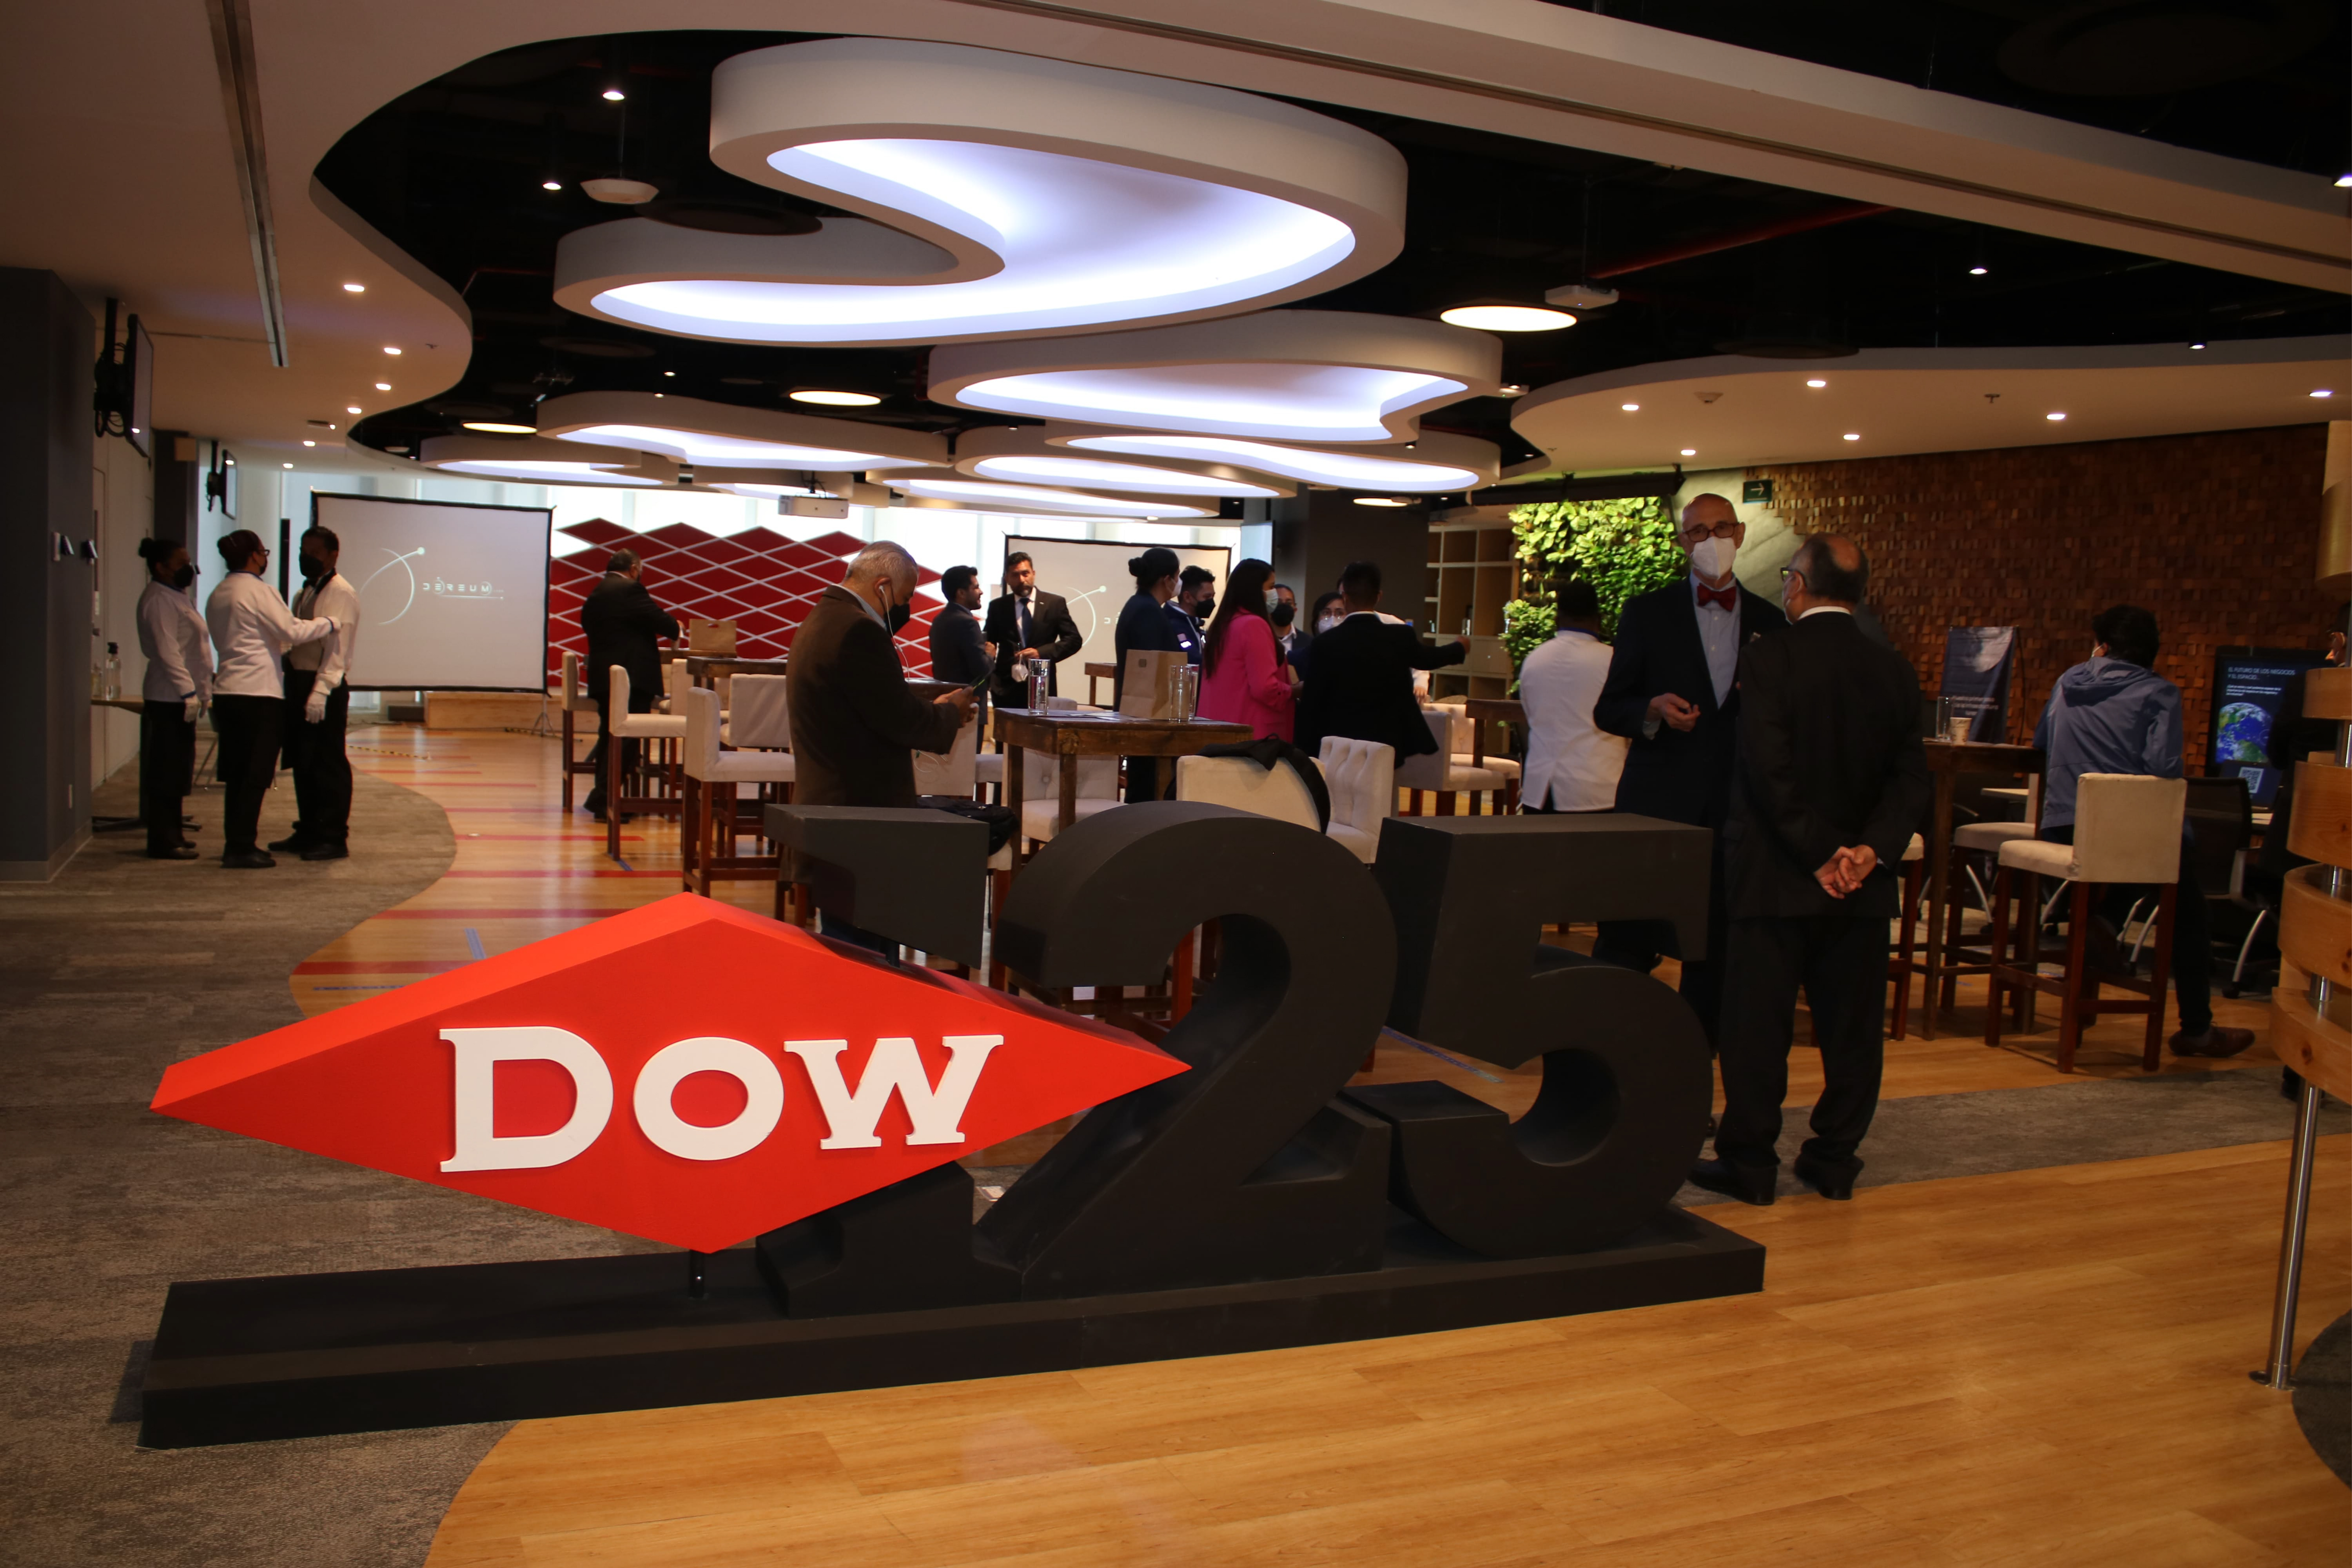 Space Day - Dow Chemical